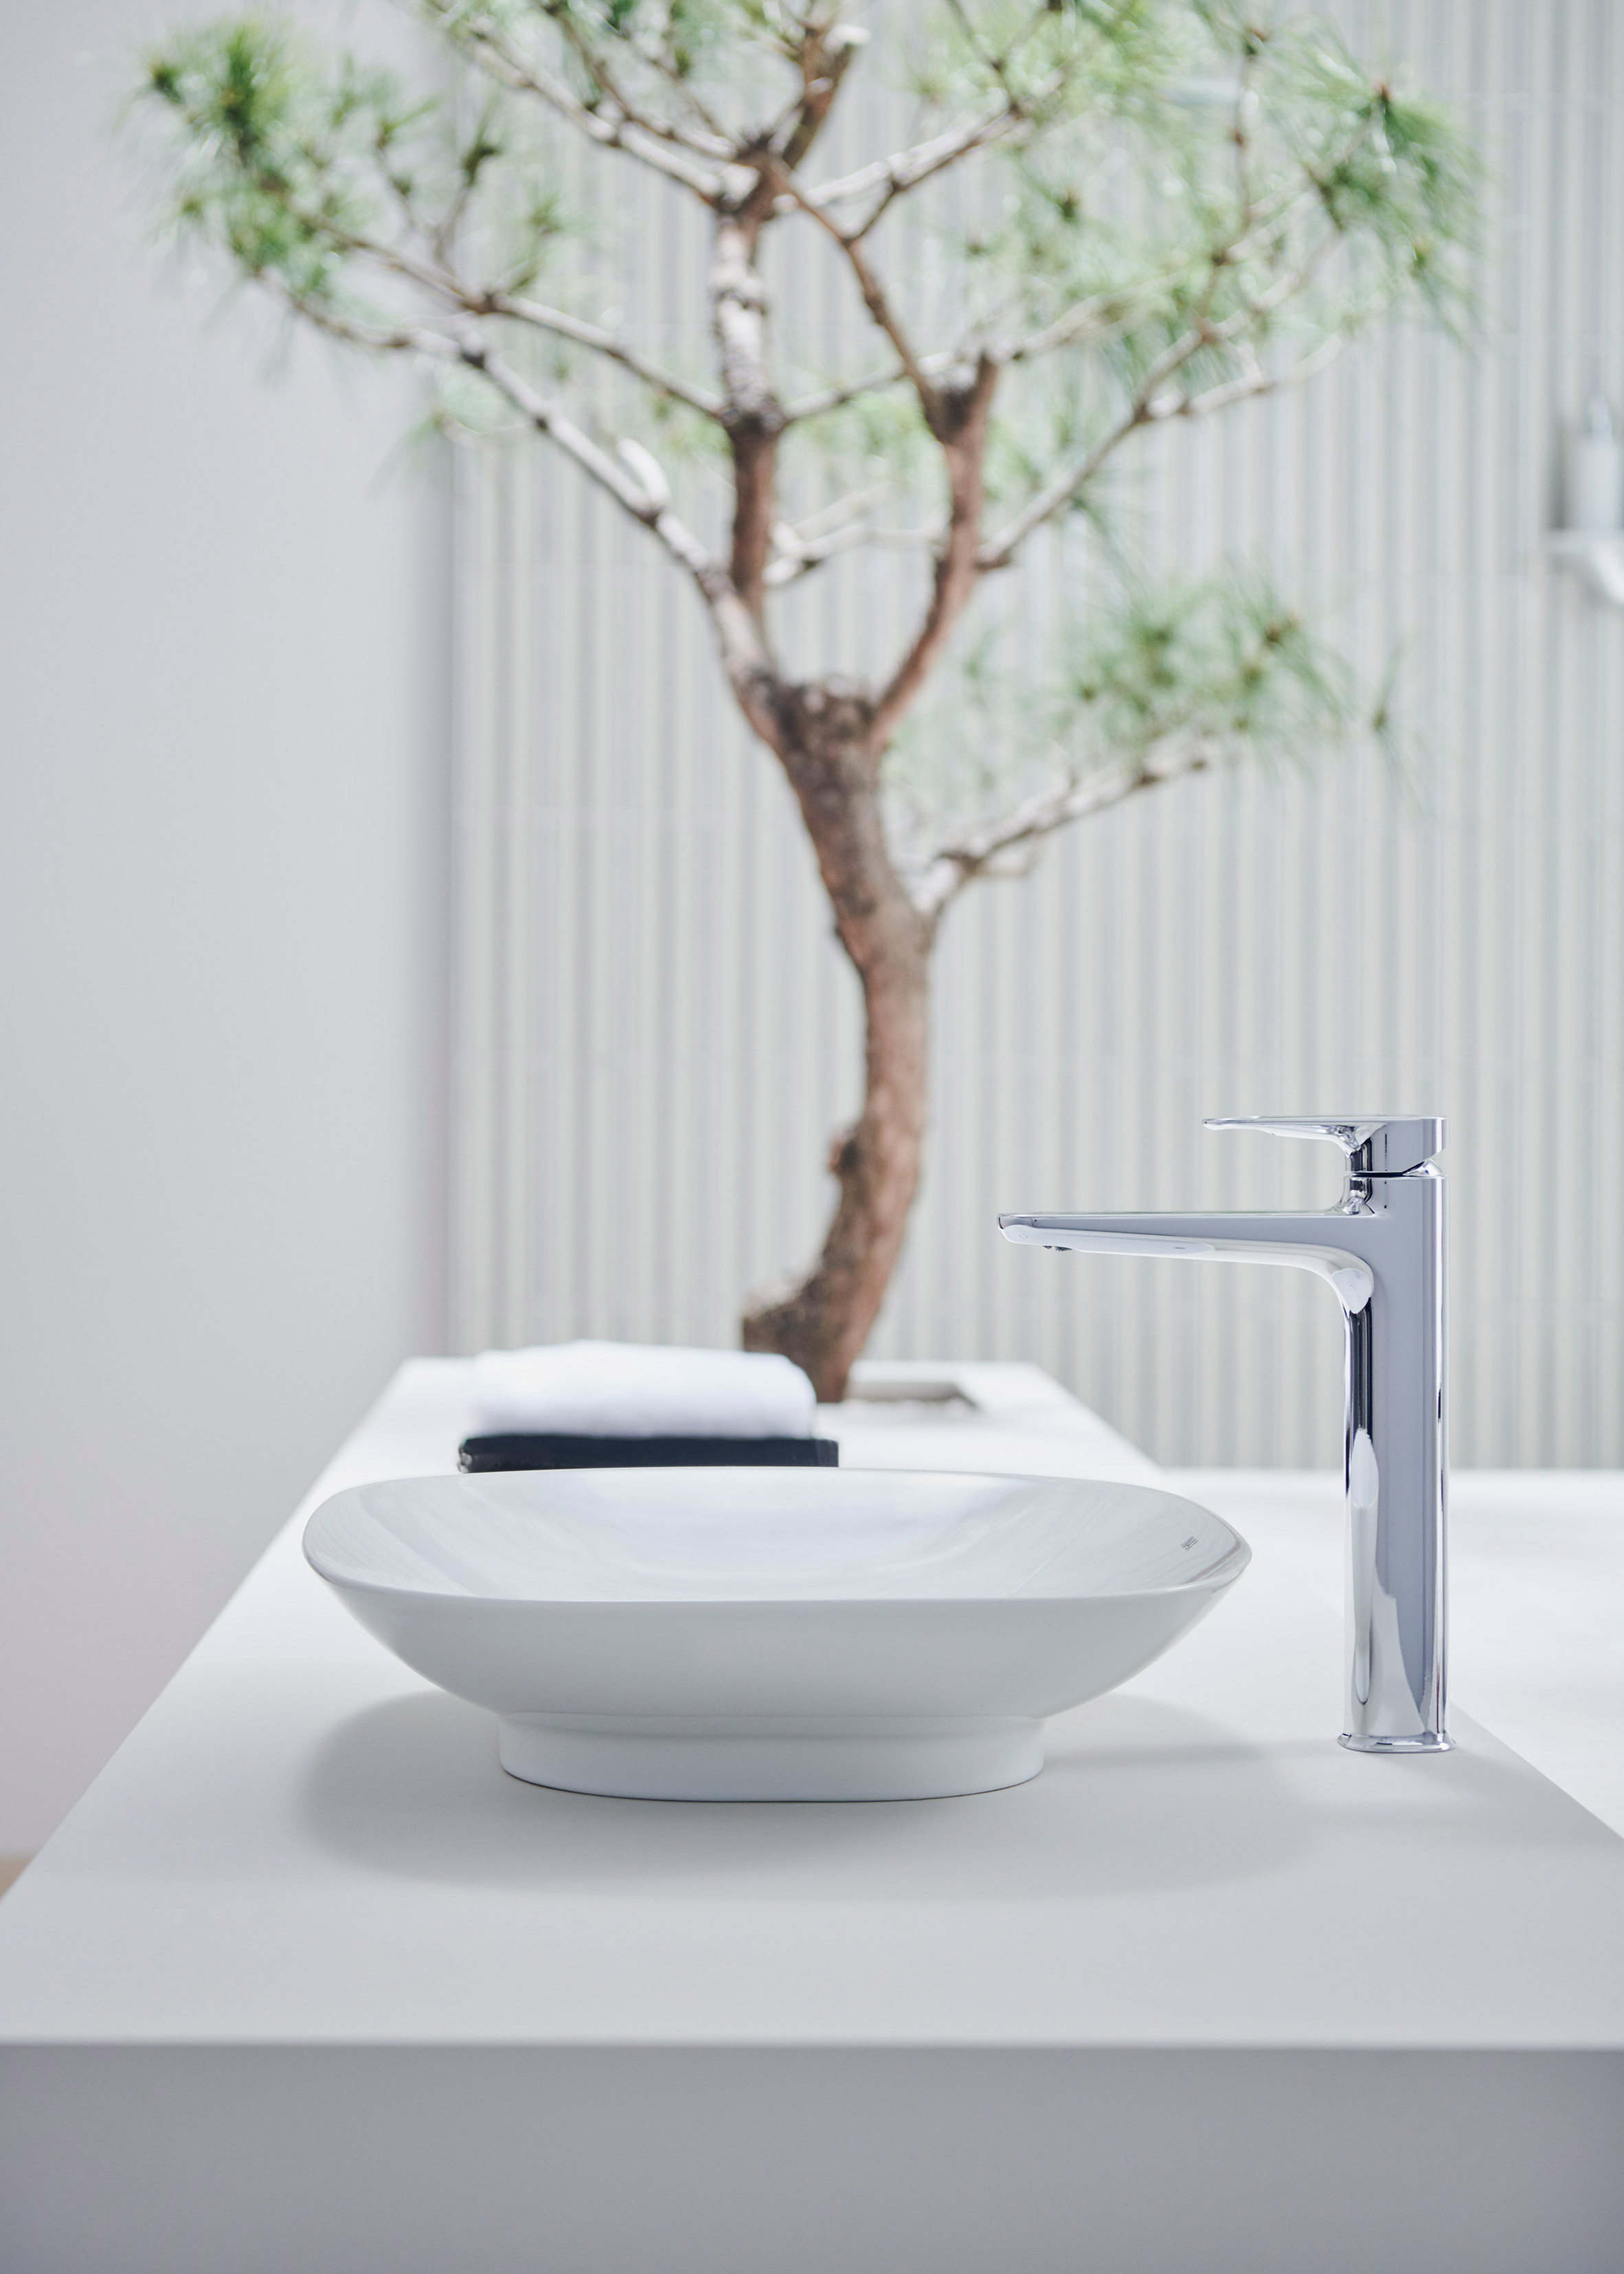 Inax To Unveil Latest Bathroom Collection At Milan Design Week